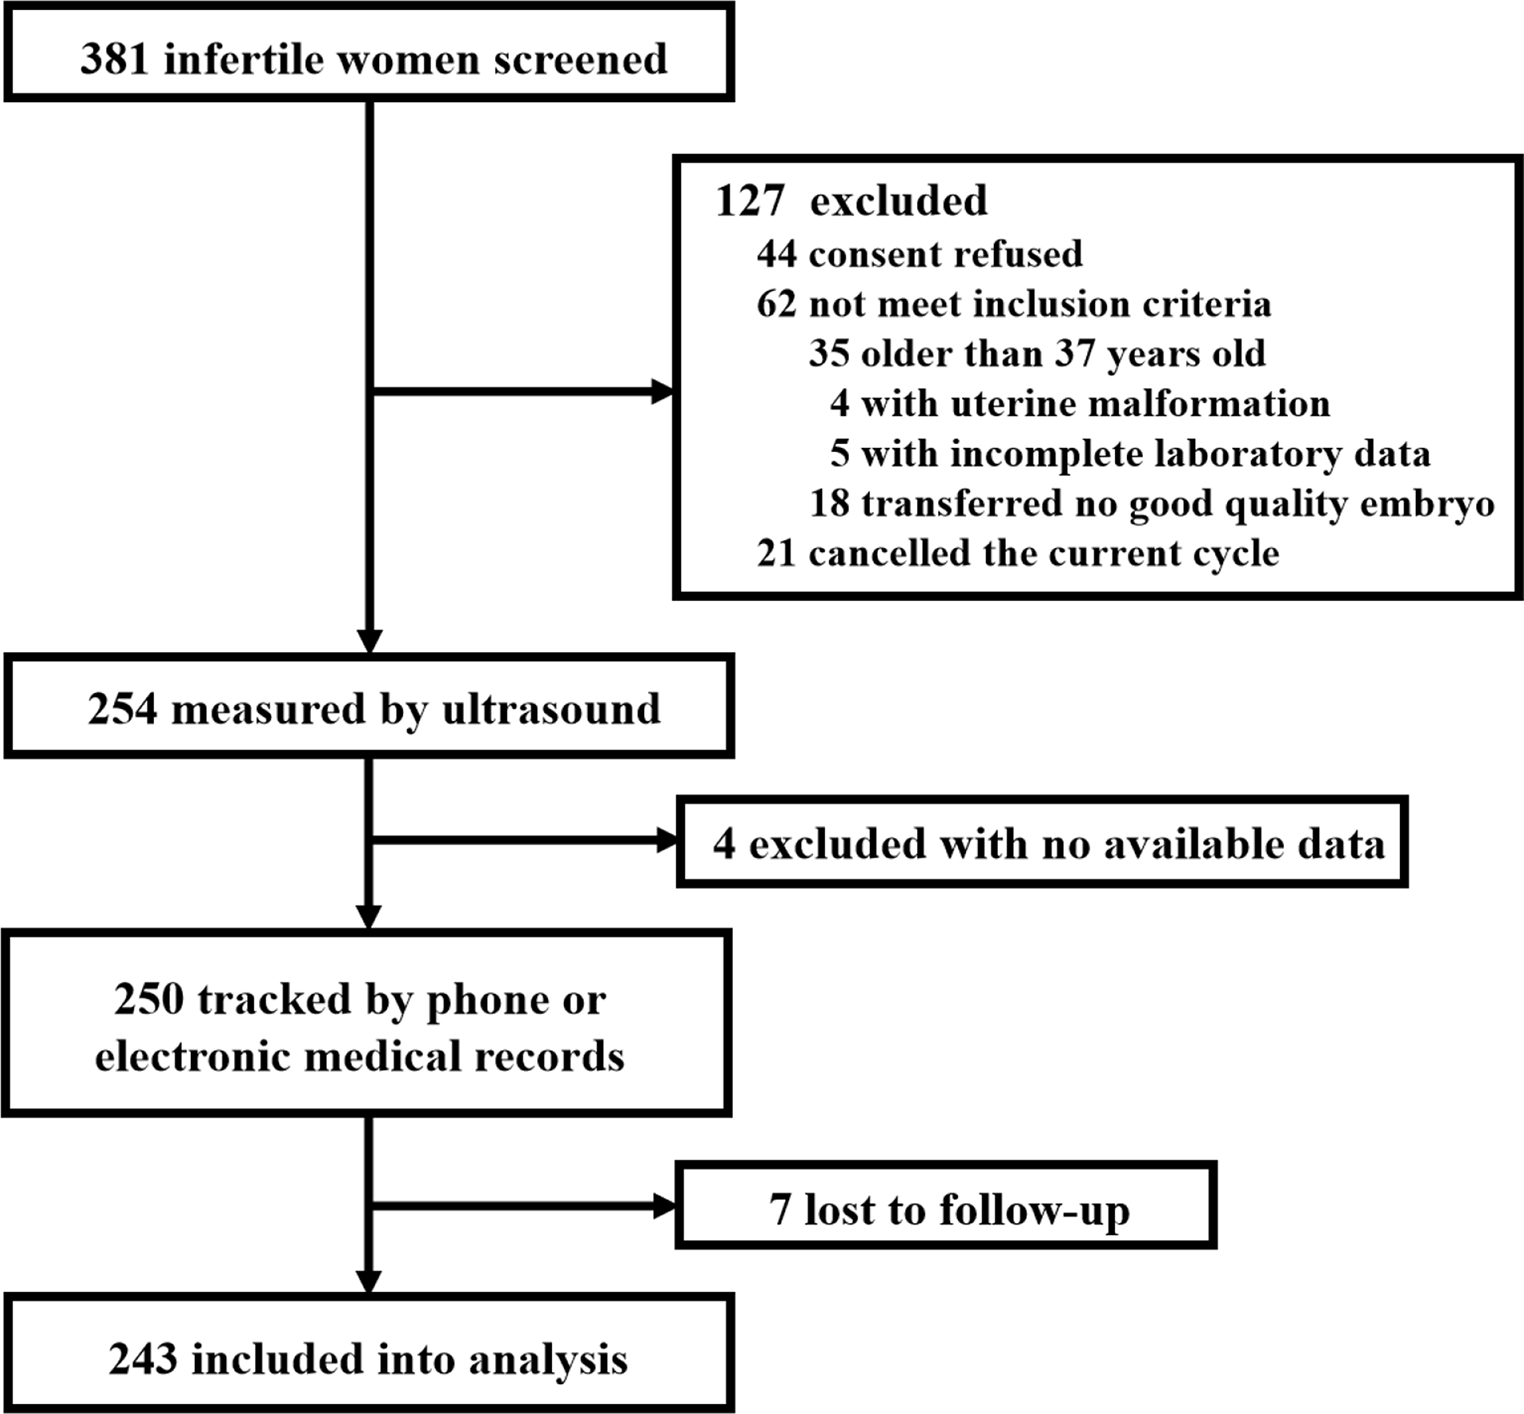 Endometrial Elasticity is an Ultrasound Marker for Predicting Clinical Pregnancy Outcomes after Embryo Transfer